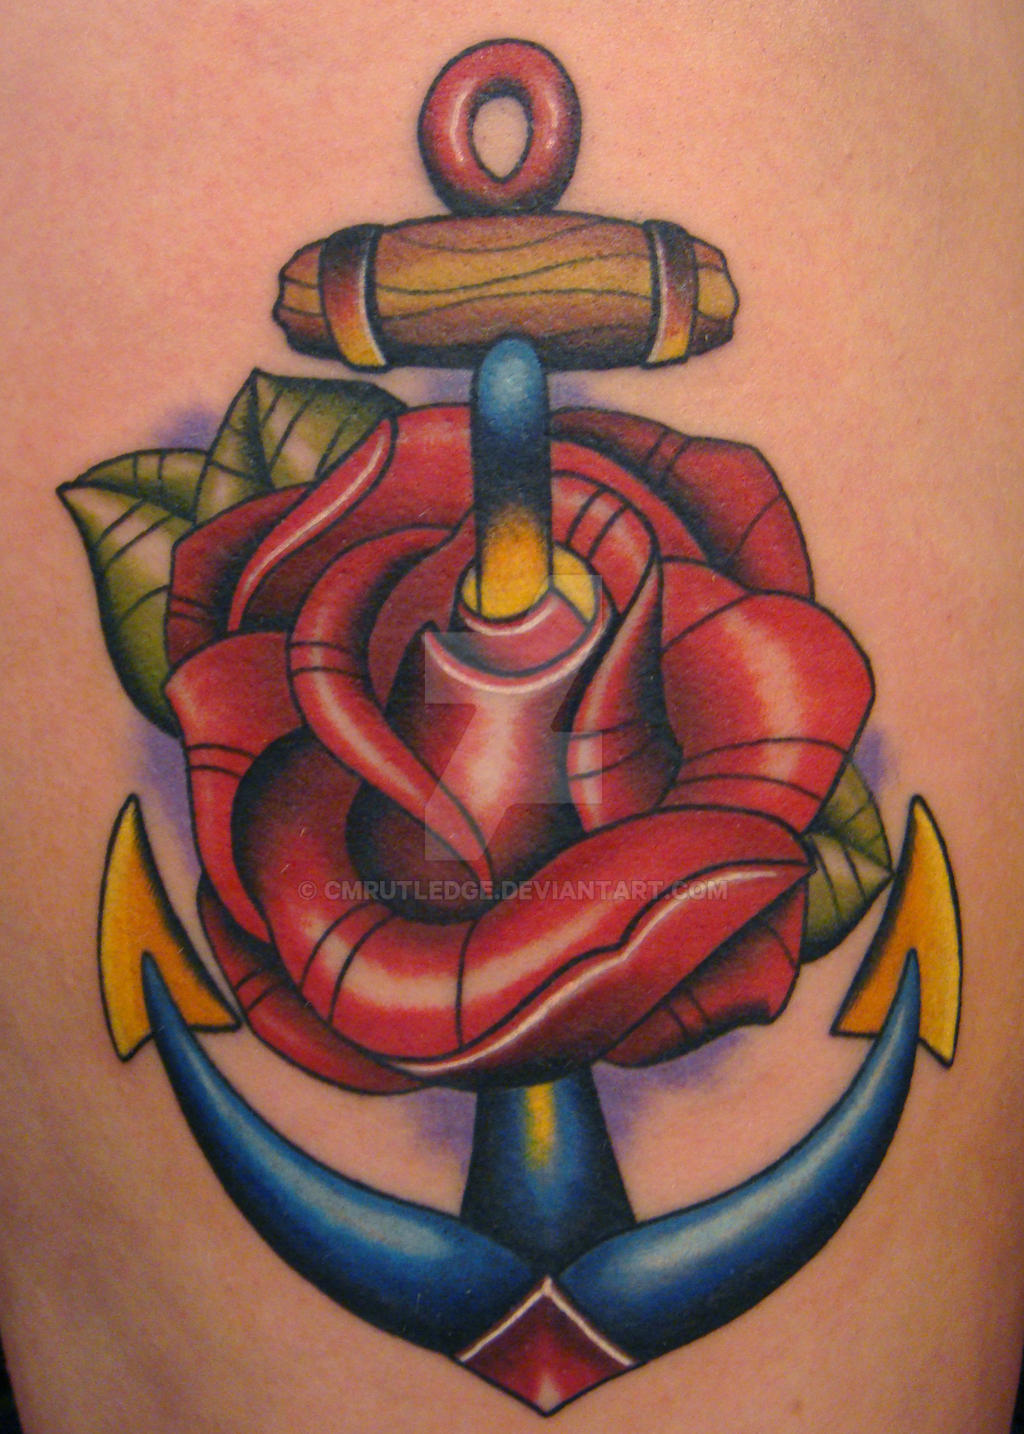 Anchor and Rose Tattoo by cmrutledge on DeviantArt